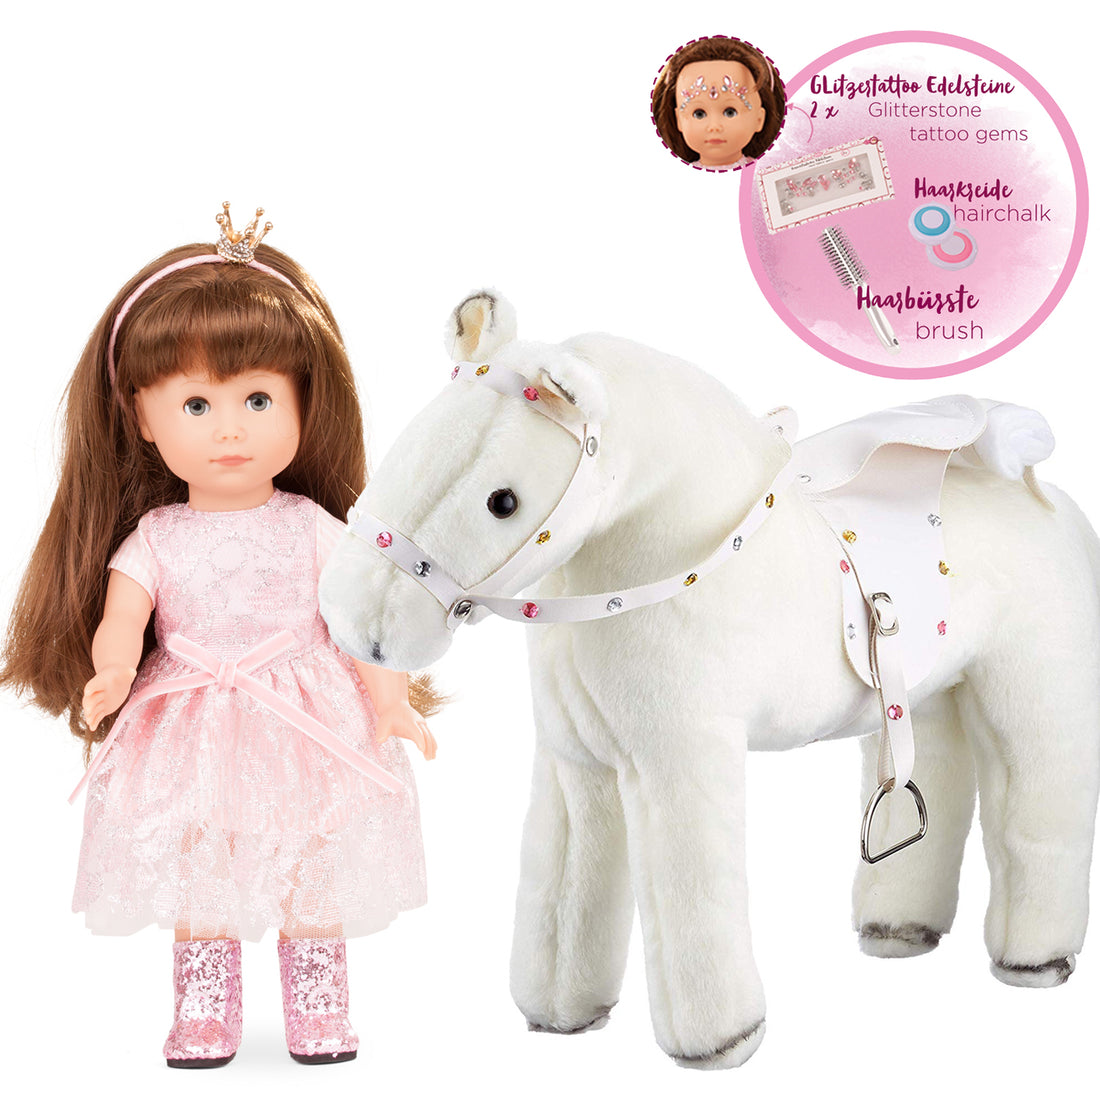 Riding fun with White Lightning - Dolls and Accessories